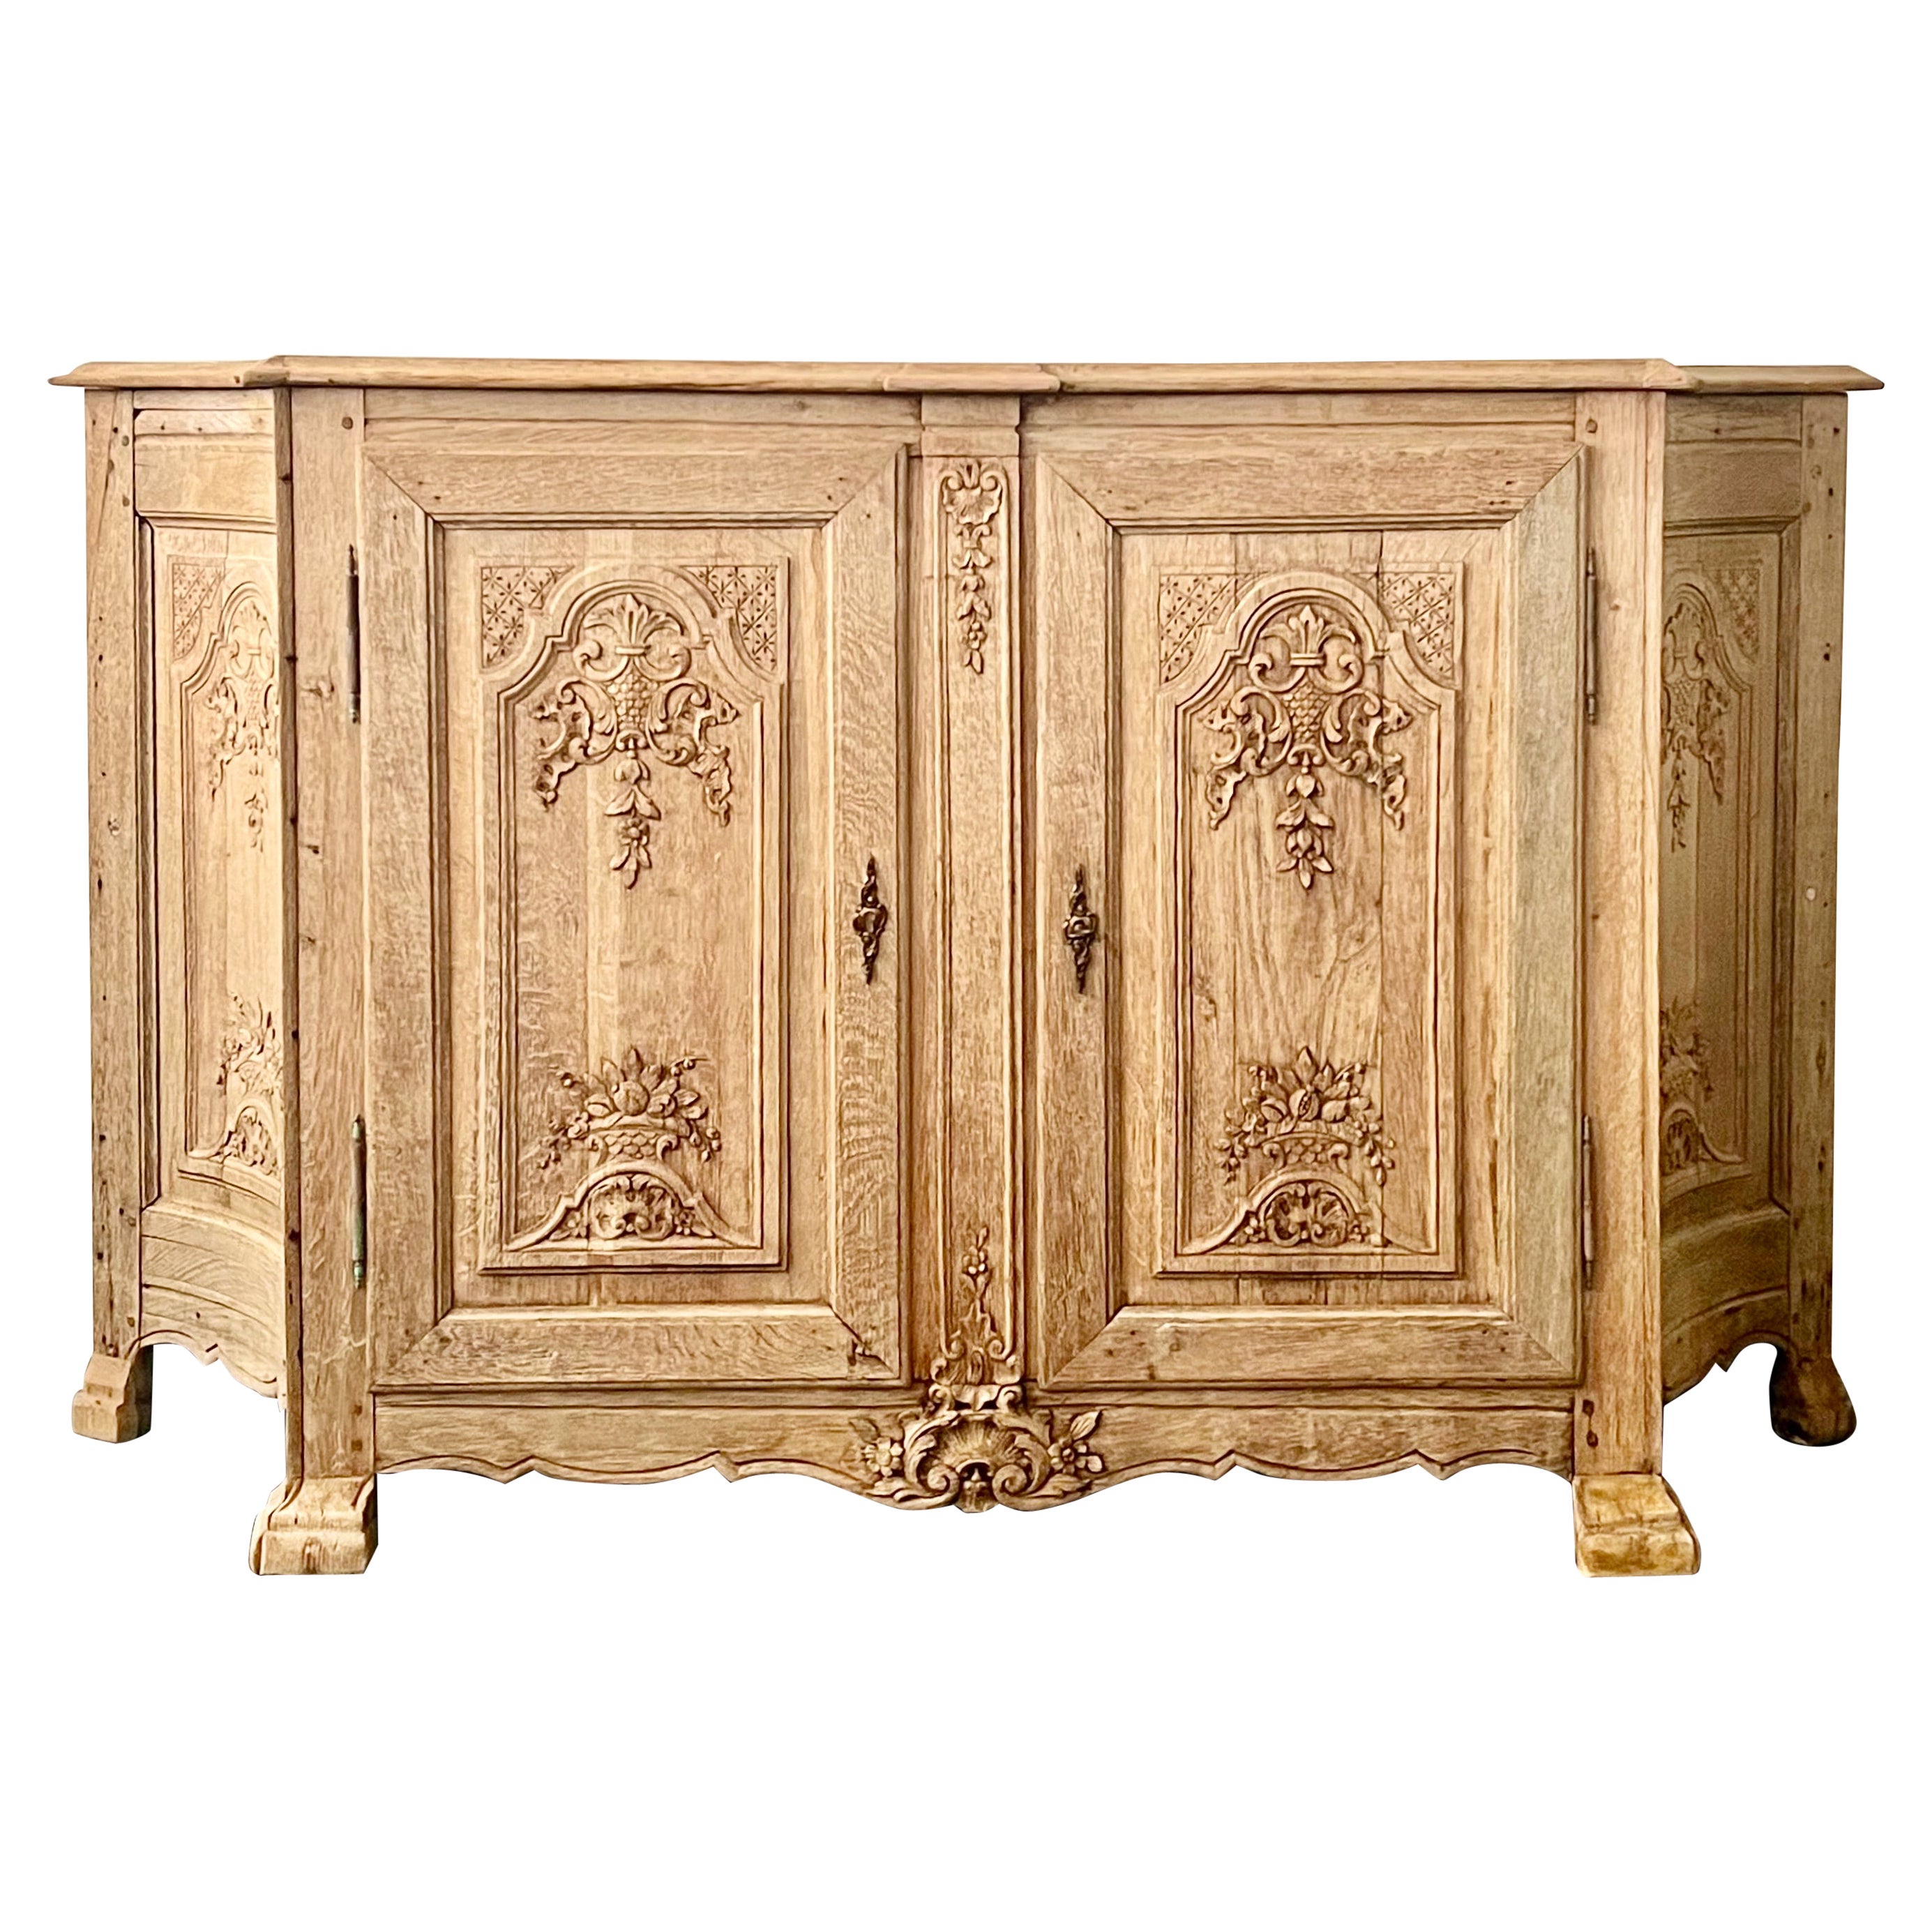 19th Century French Enfilade/Sideboard